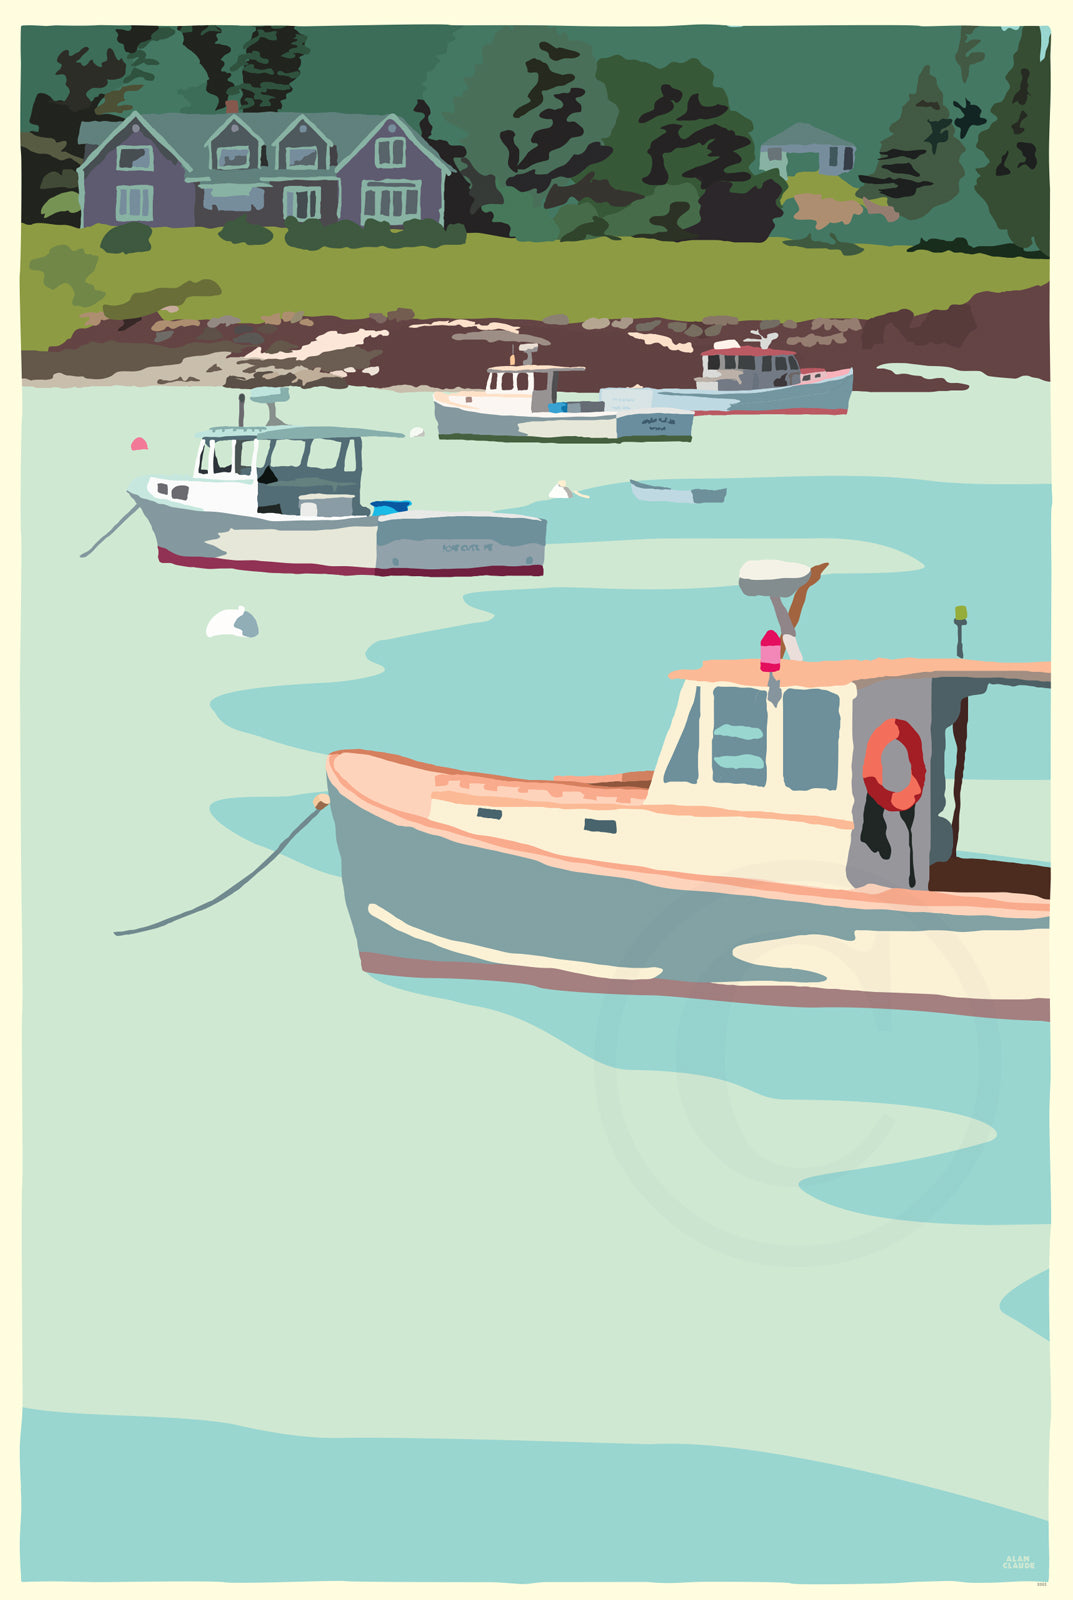 Anchored Art Print 24" x 36" Wall Poster By Alan Claude - Maine